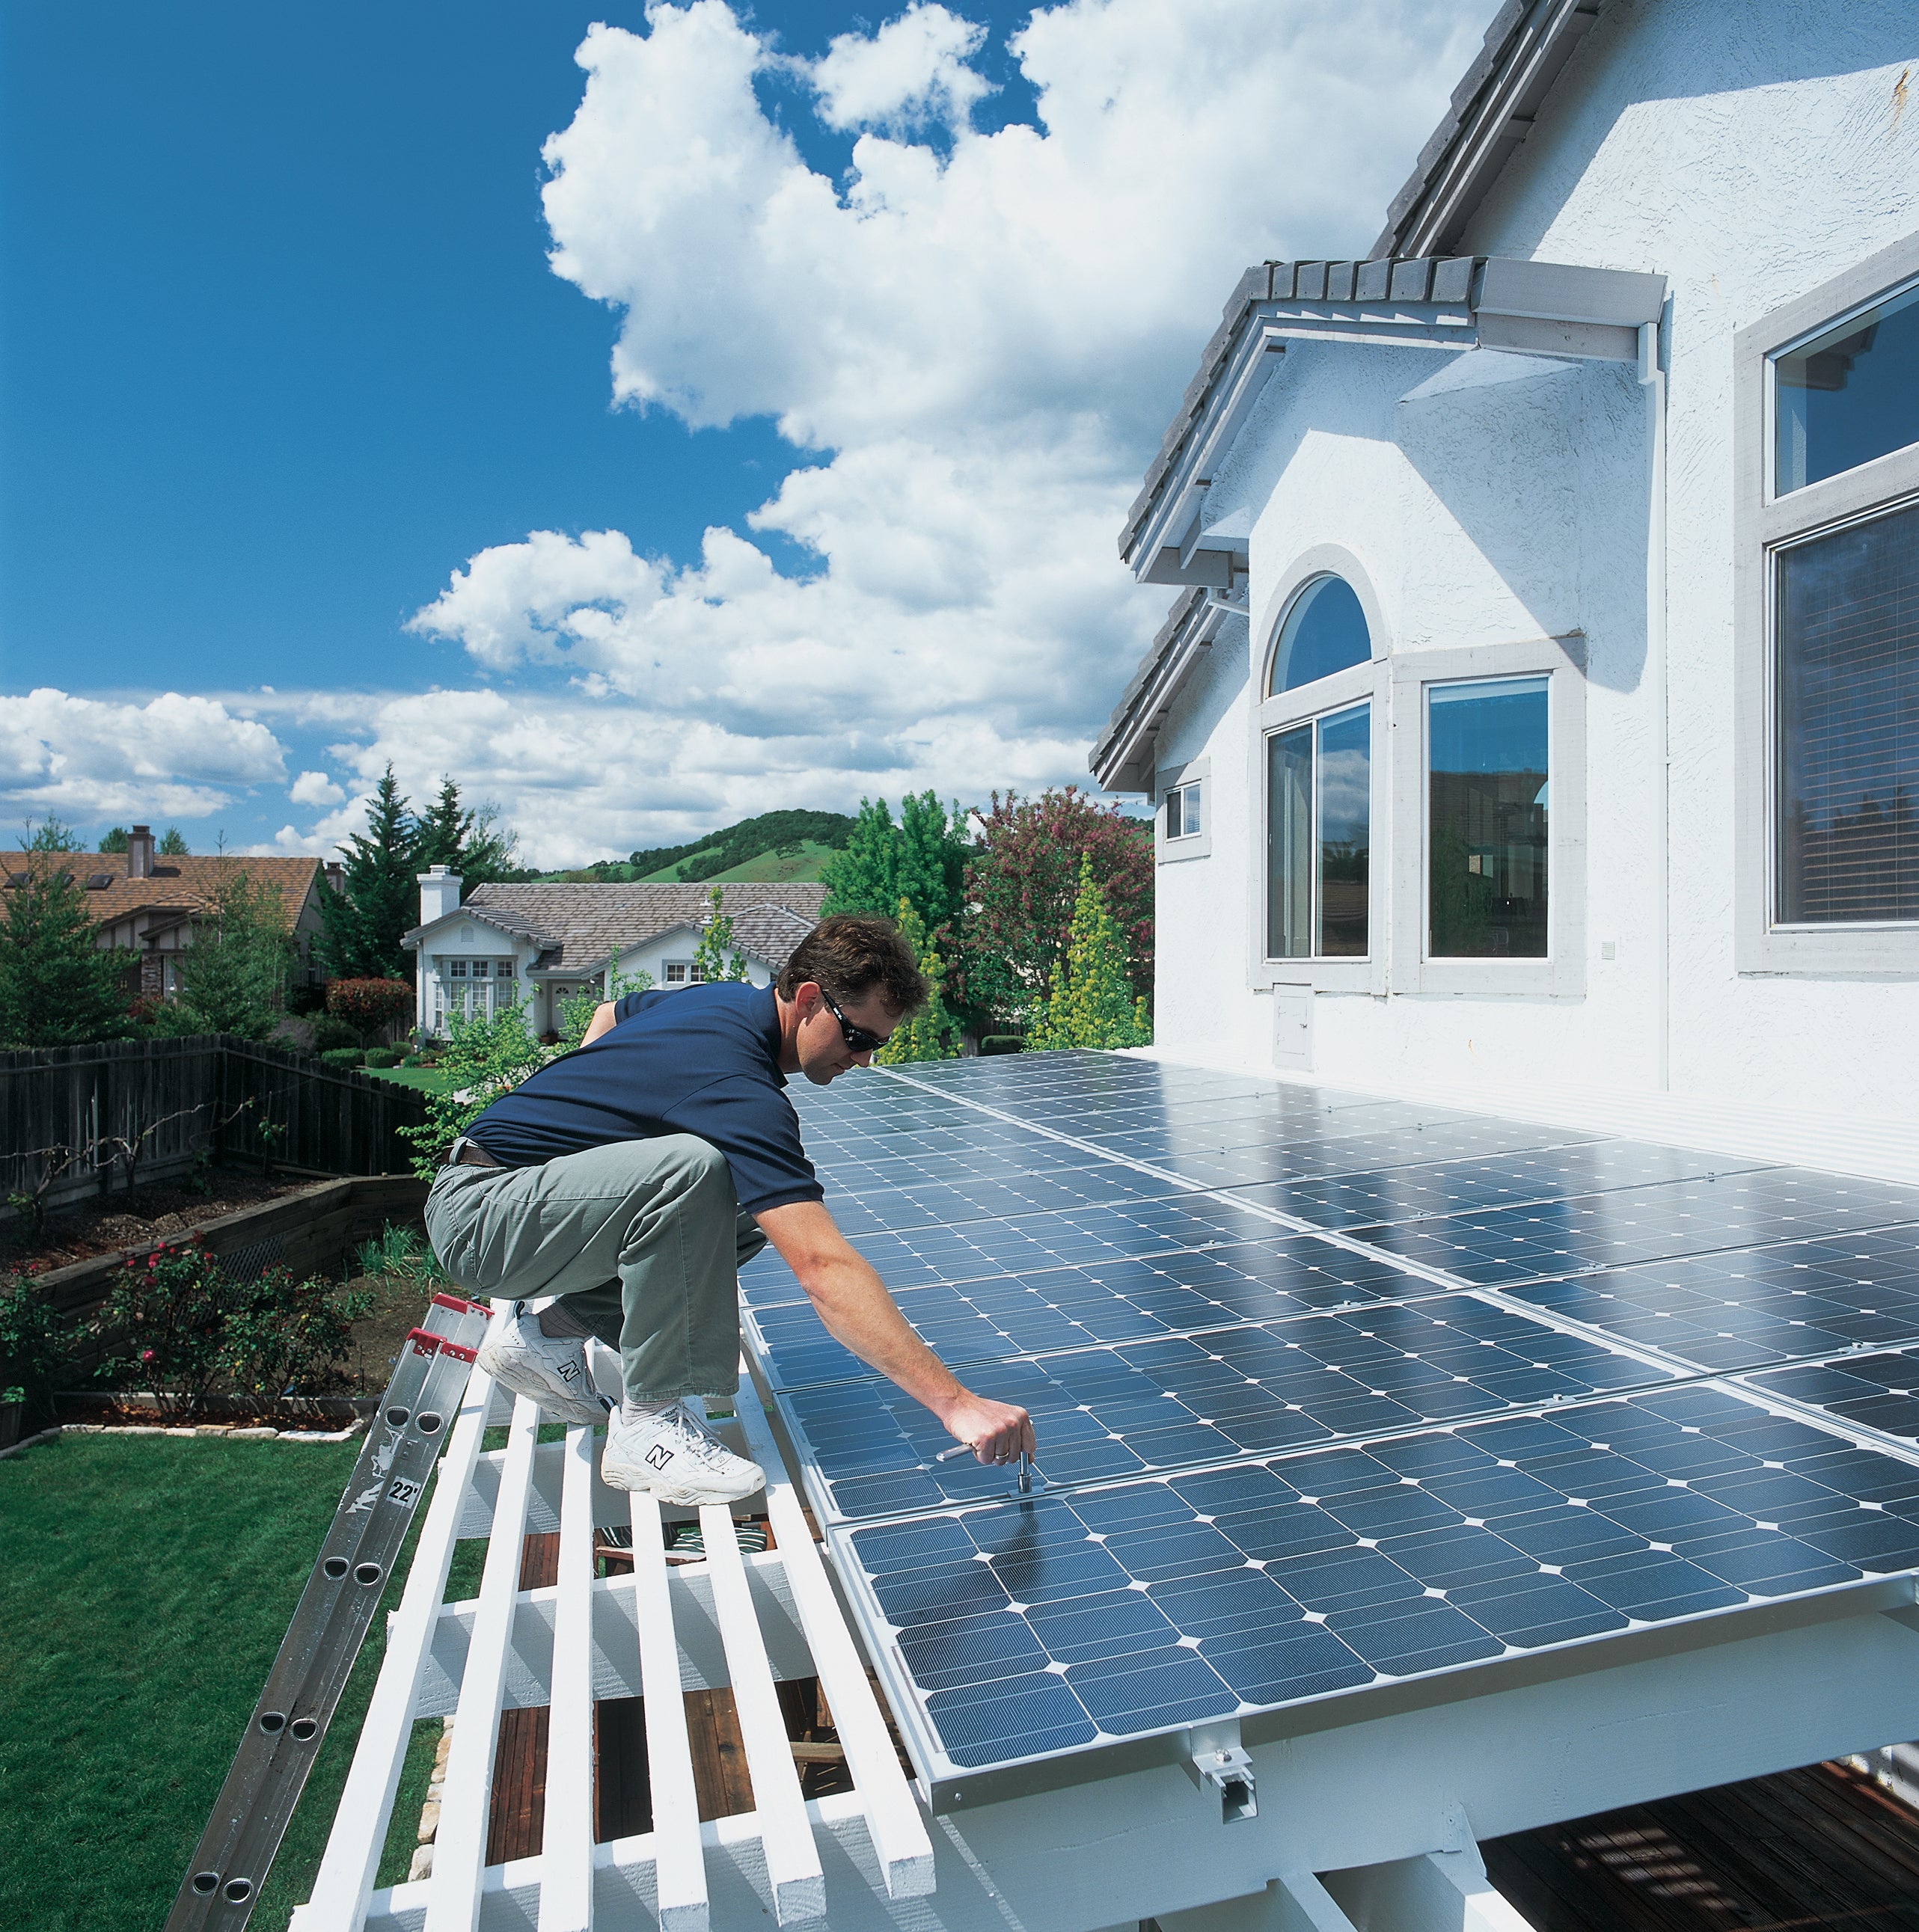 A man installs rooftop solar panels on a roof.